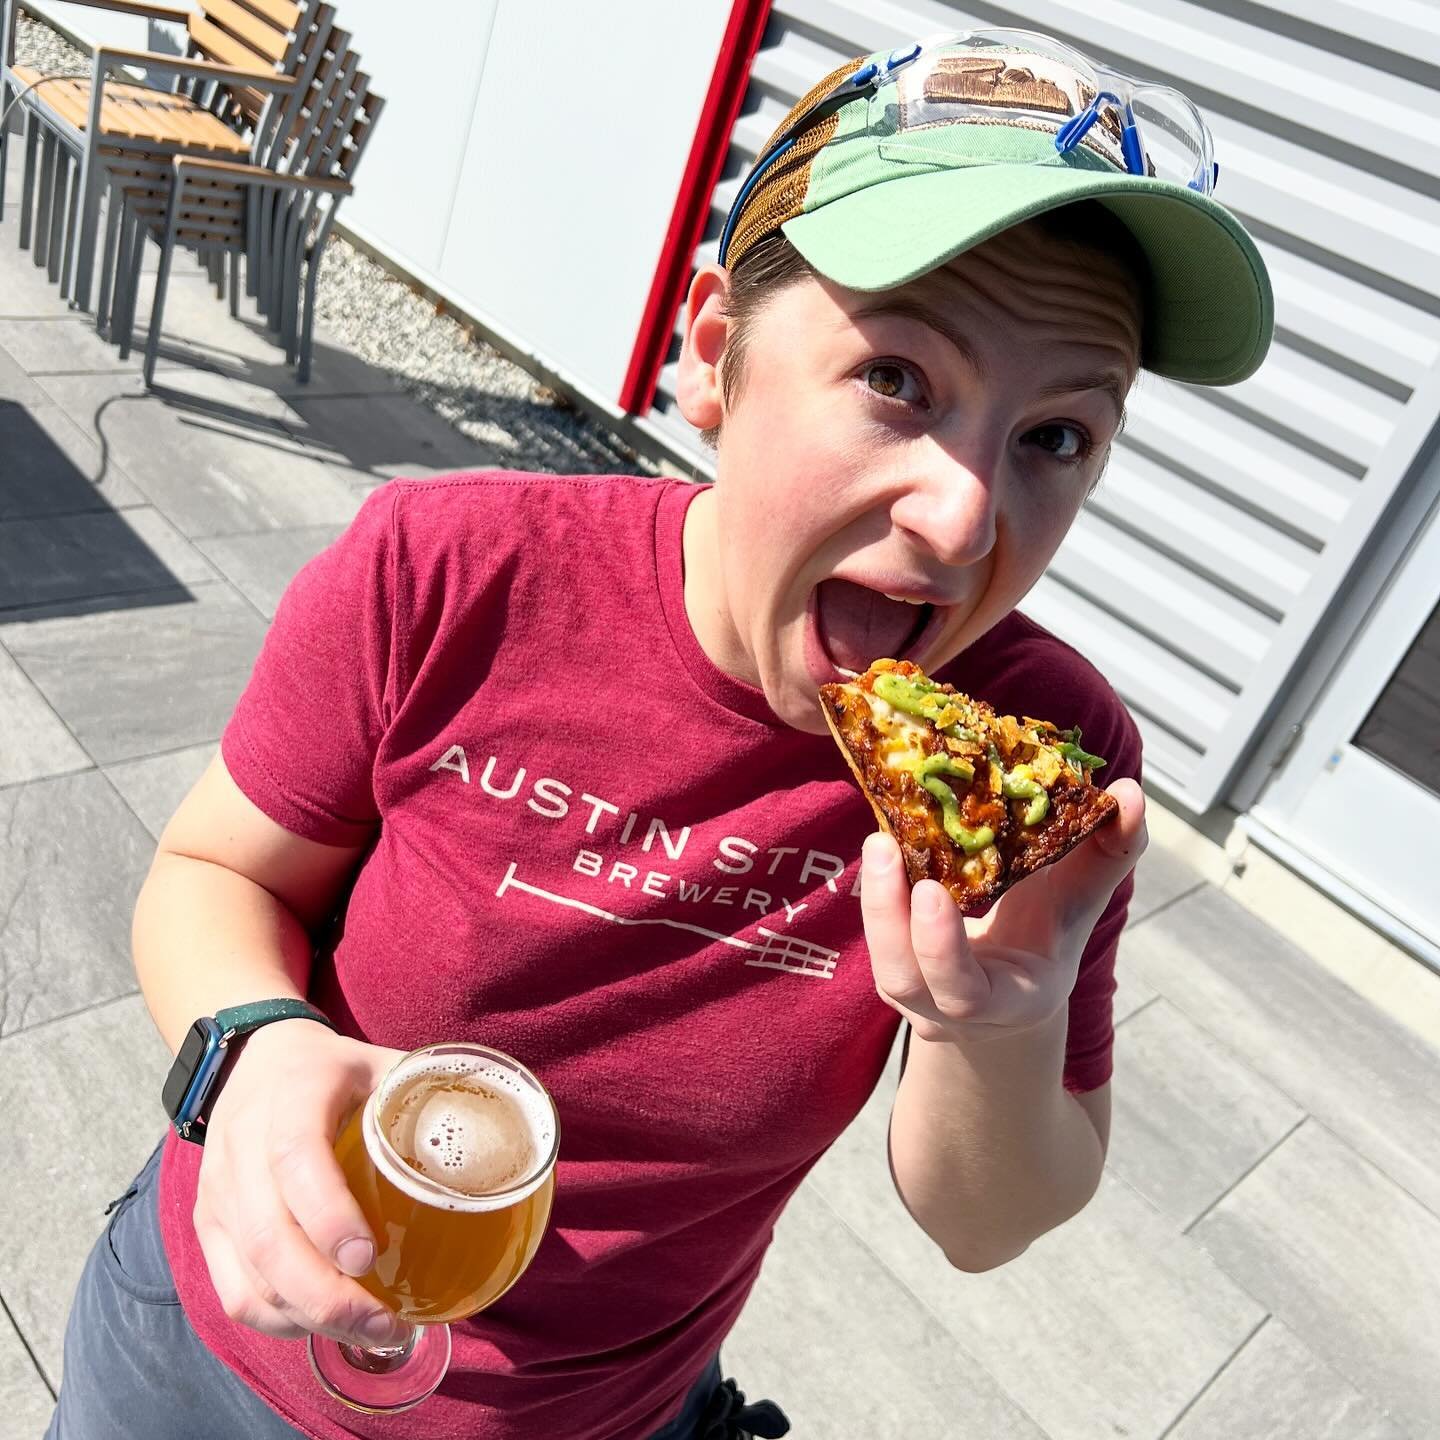 Tuesday Pizza Party!

🍕Chef Special Pizza - Chorizo taco pizza with house Chorizo, corn, roasted tomato salsa, avocado, crushed tortilla chips &amp; scallion.

Pair your Pizza Pie with our Signals Kolsch!

🚦Signals K&ouml;lsch is a 5.3% ABV Traditi